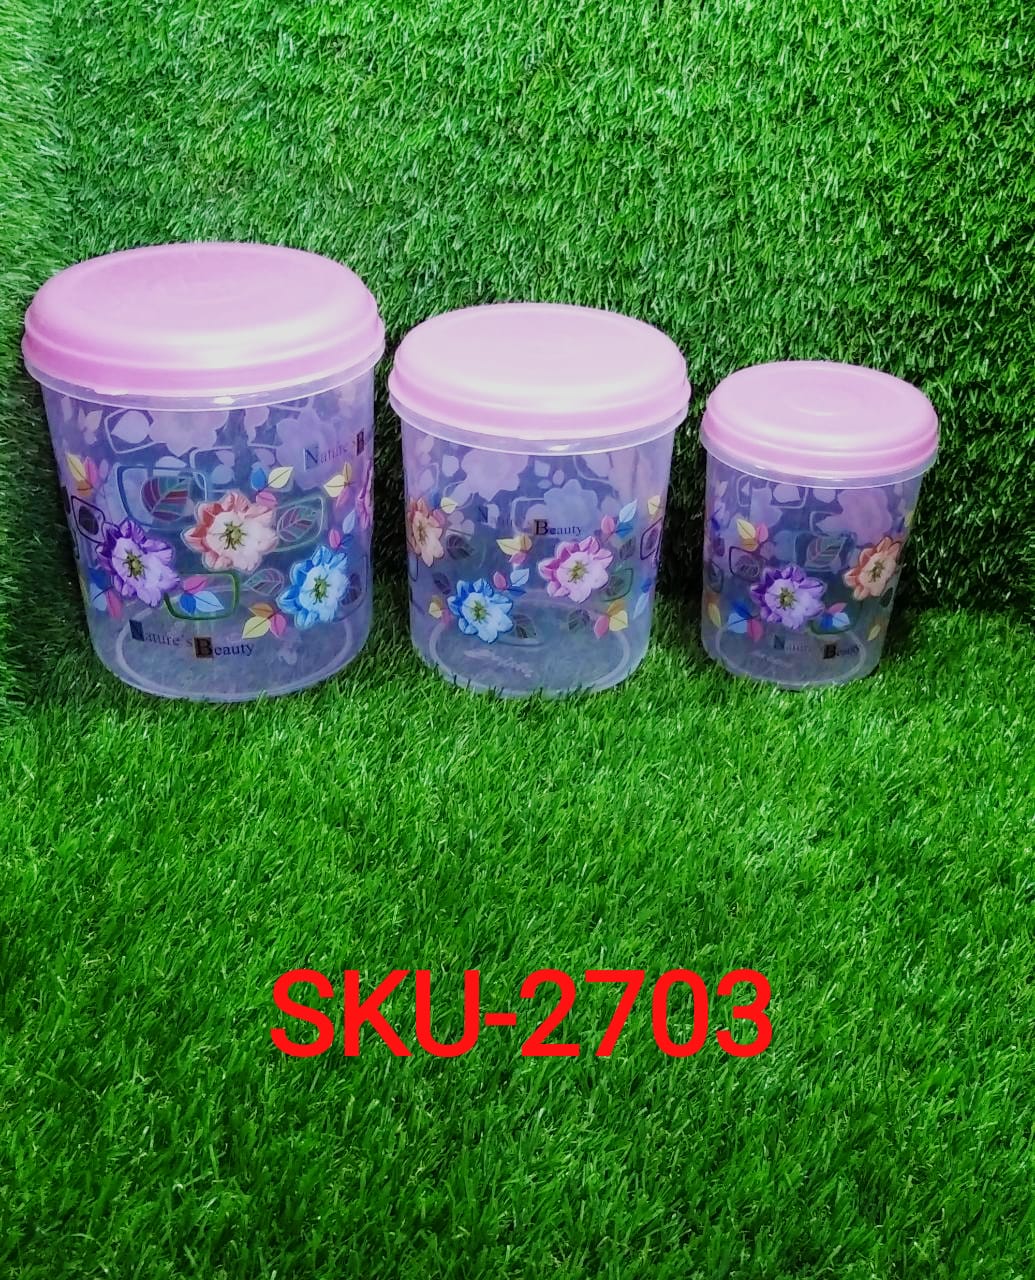 2703 3 Pc Storage Container used in all kinds of places including household and offices for storing stuffs and items etc.